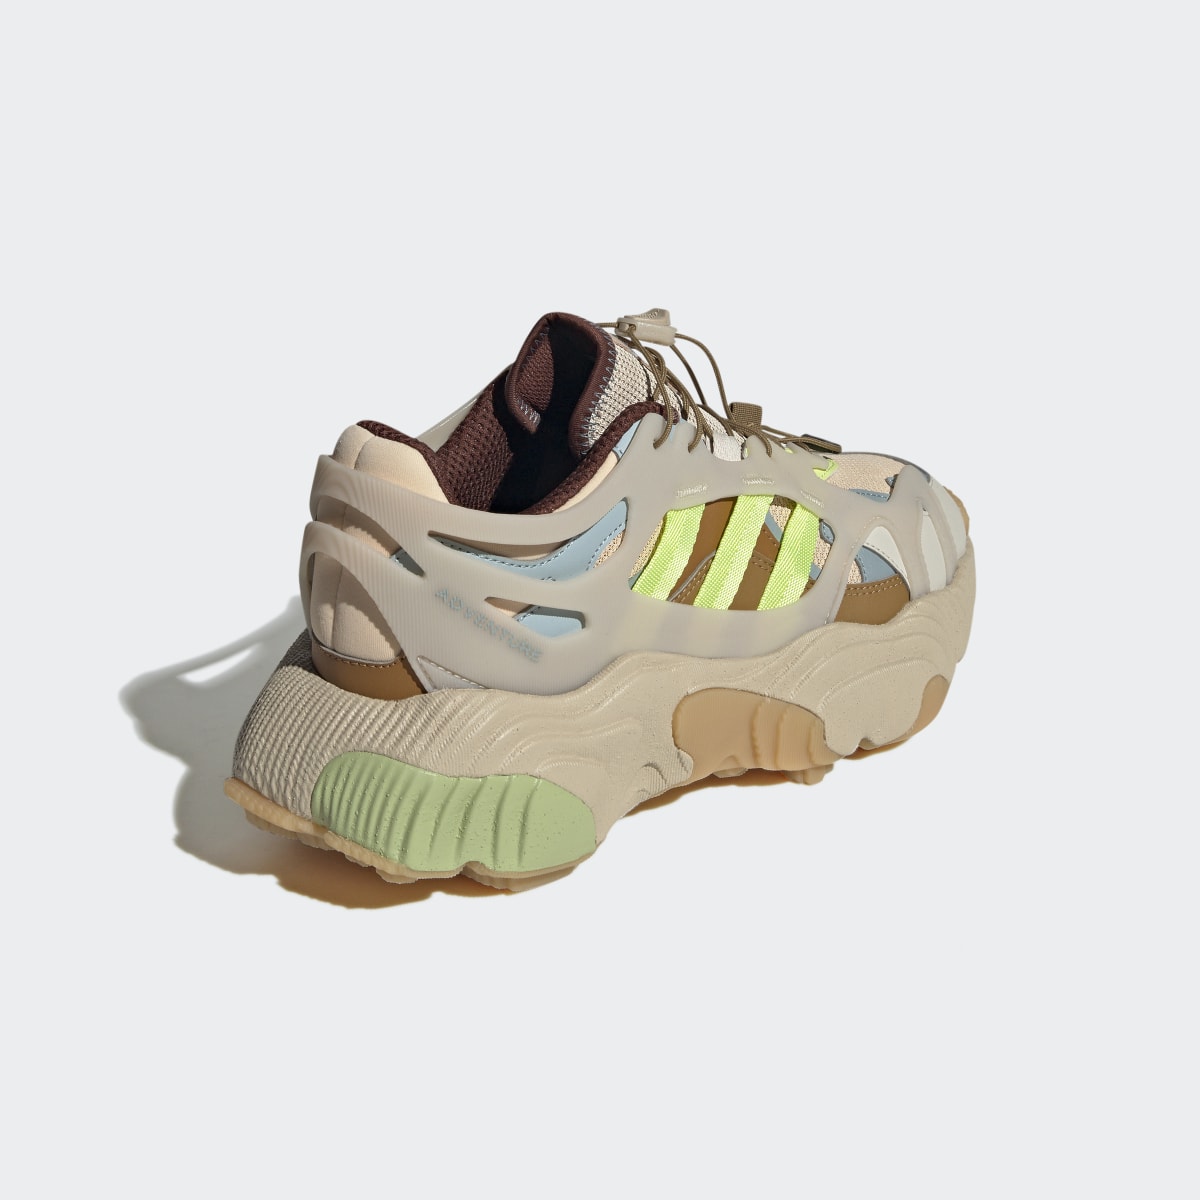 Adidas Roverend Adventure Shoes. 6